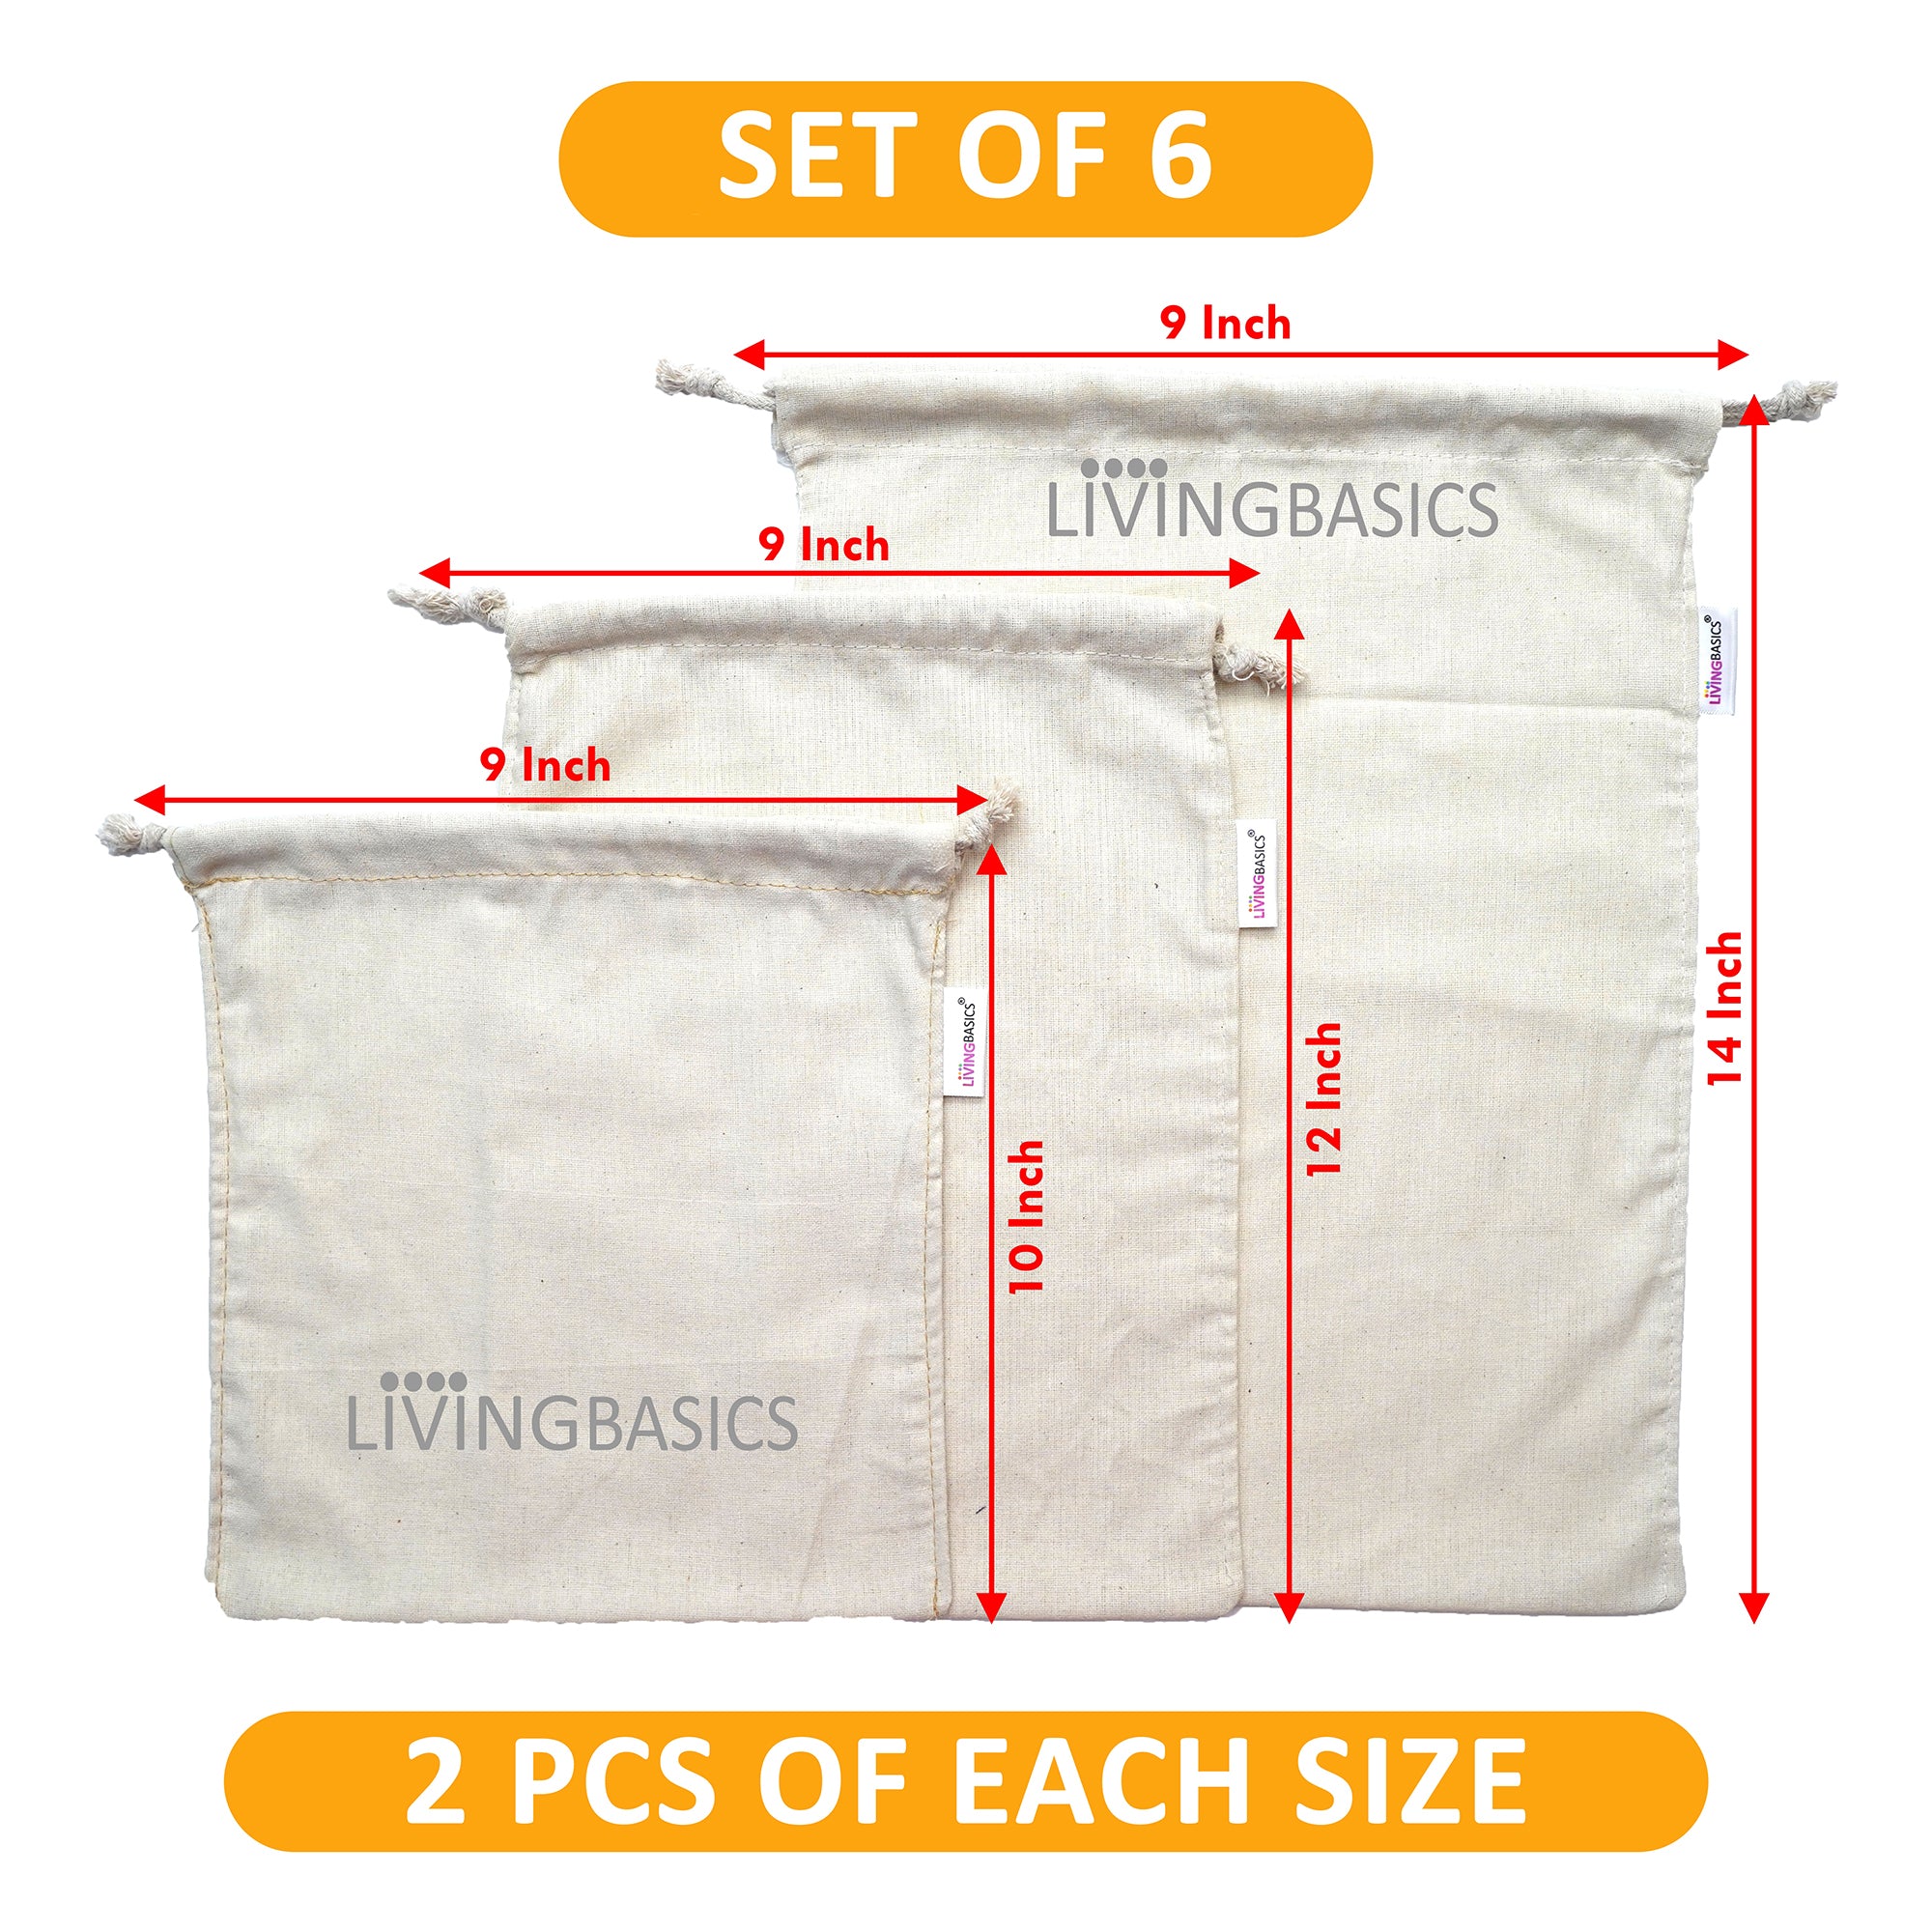 LivingBasics 6 Pieces Premium Cotton Vegetable Storage Bags For Fridge - Vegetables Cover / Covers - Fresh Fruits Pouch / Pouches For Kitchen - Air Circulating Reusable Refrigerator Organizer Bag